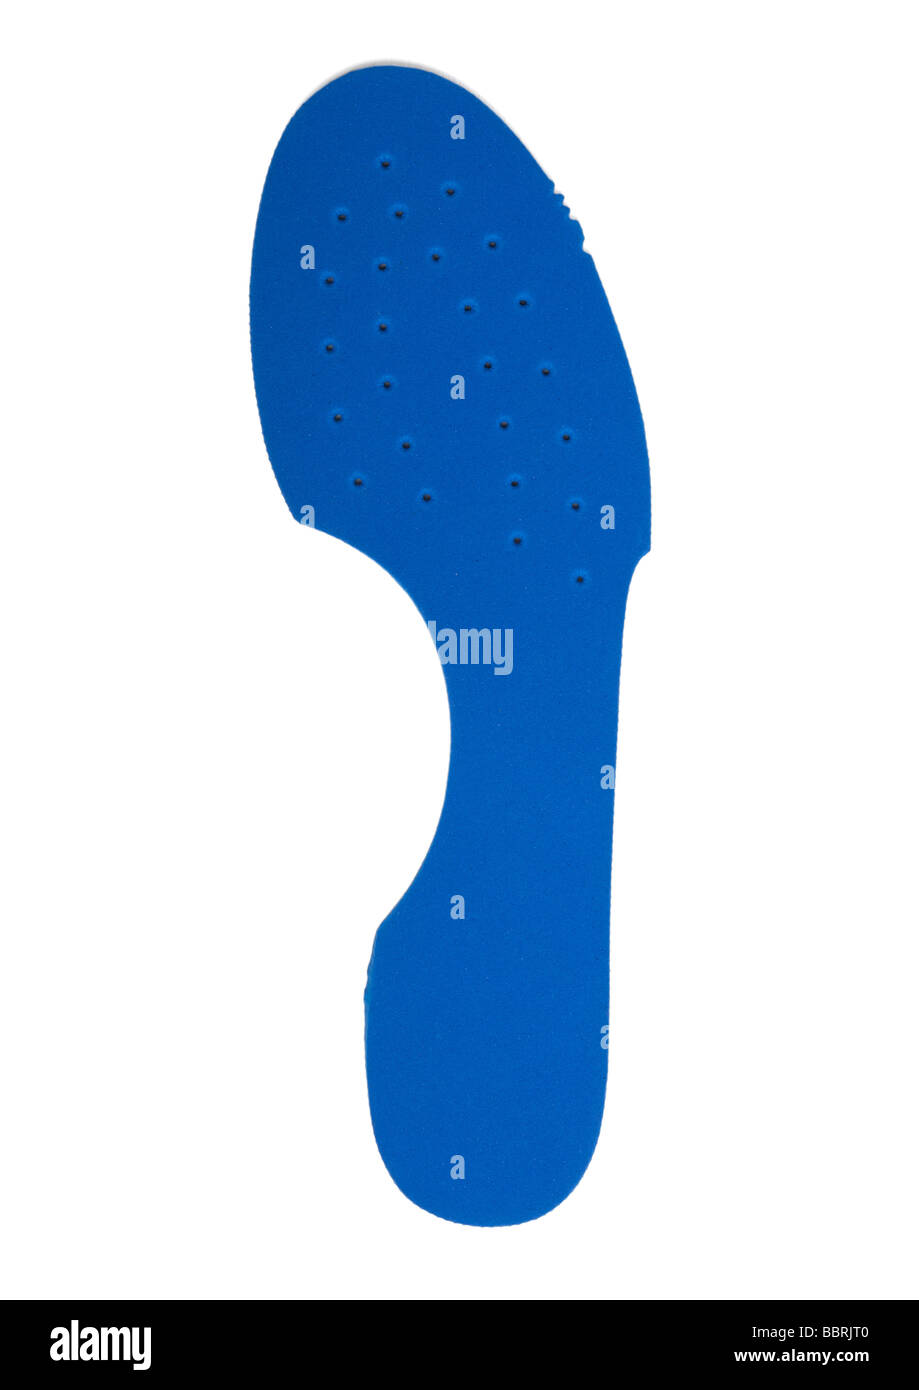 Insole High Resolution Stock Photography and Images - Alamy